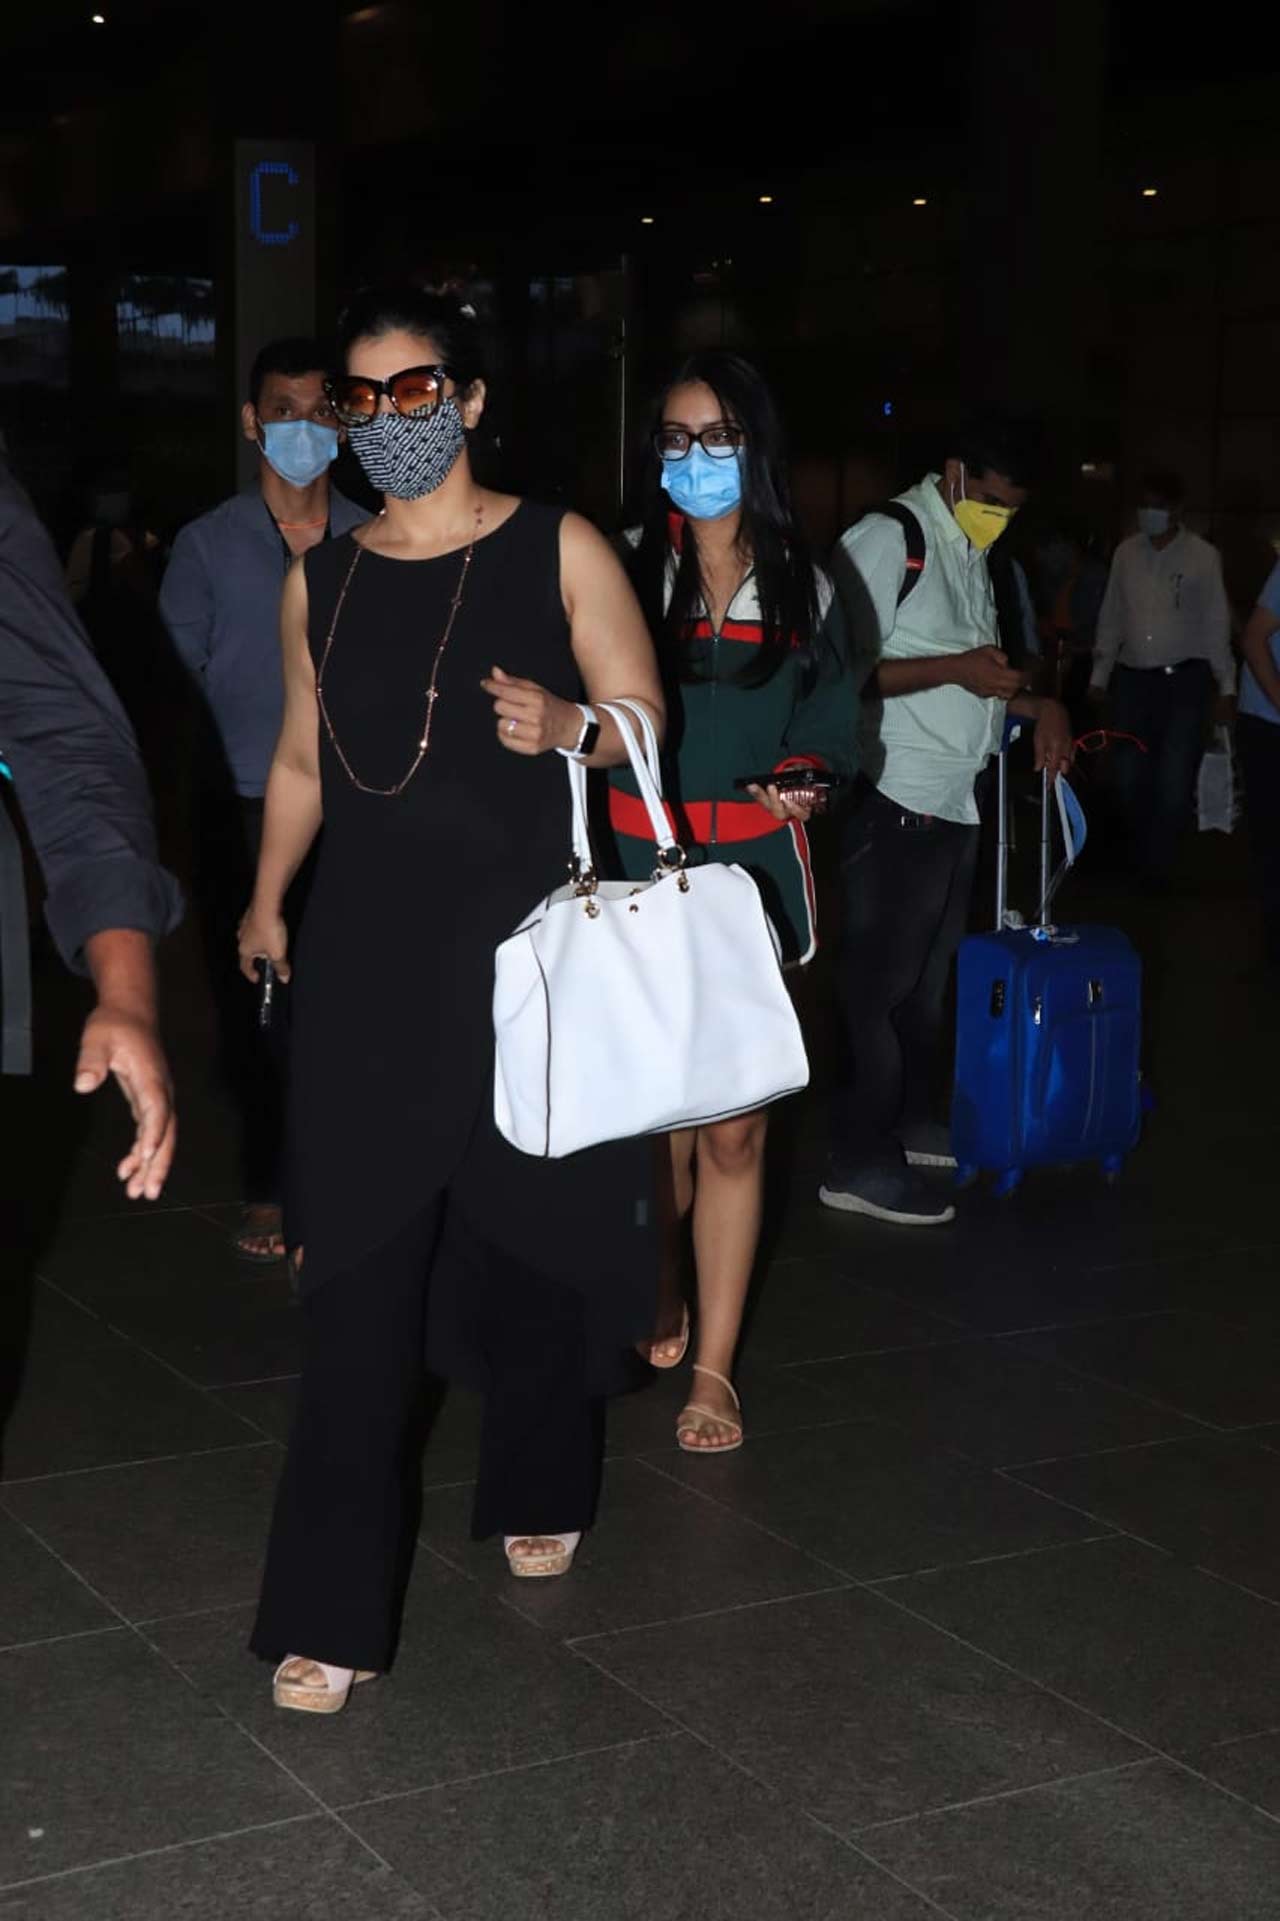 Kajol Devgan was snapped with daughter Nysa at the Mumbai airport. Kajol opted for an all-black outfit whereas Nysa dressed in a co-ord set as her airport look. The gen-z kid is truly a fashionista. 